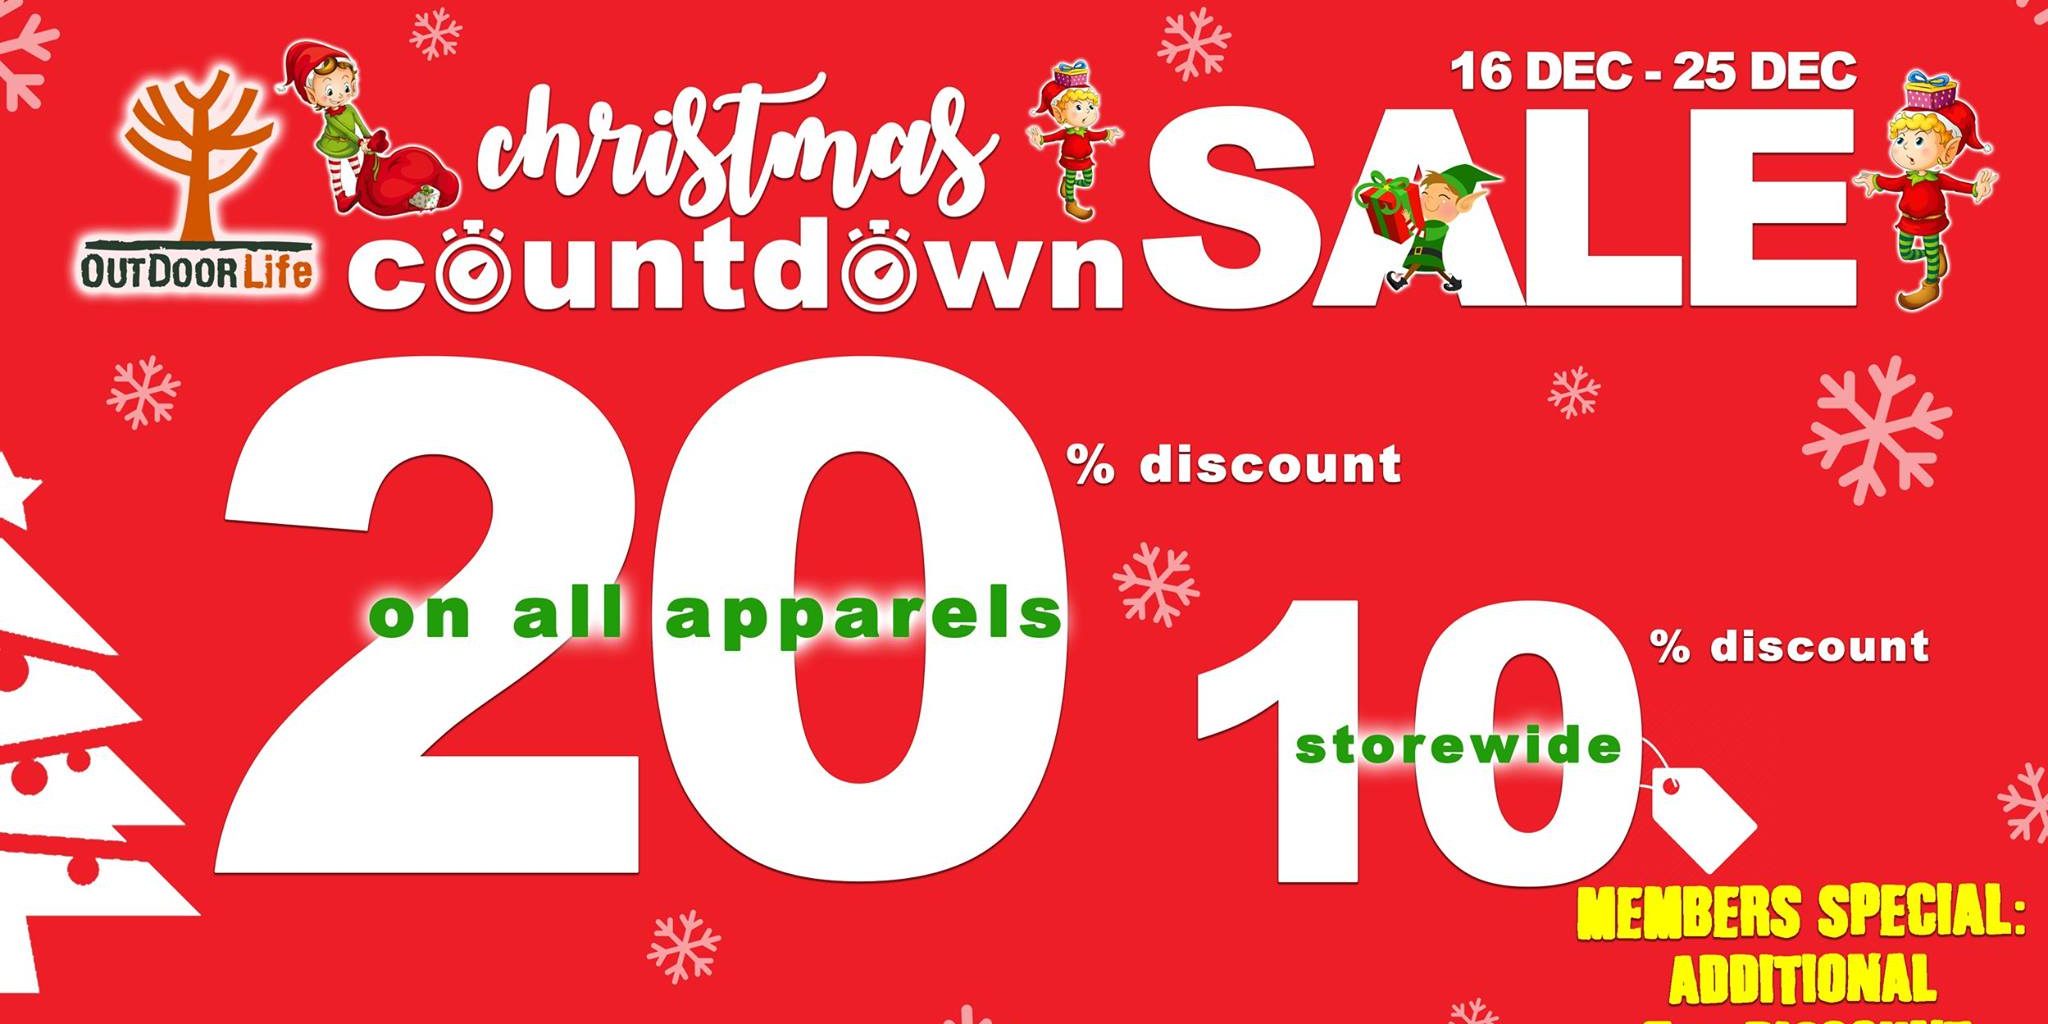 Outdoor Life Singapore Christmas Countdown Sale Up to 20% Off Promotion 16-25 Dec 2016